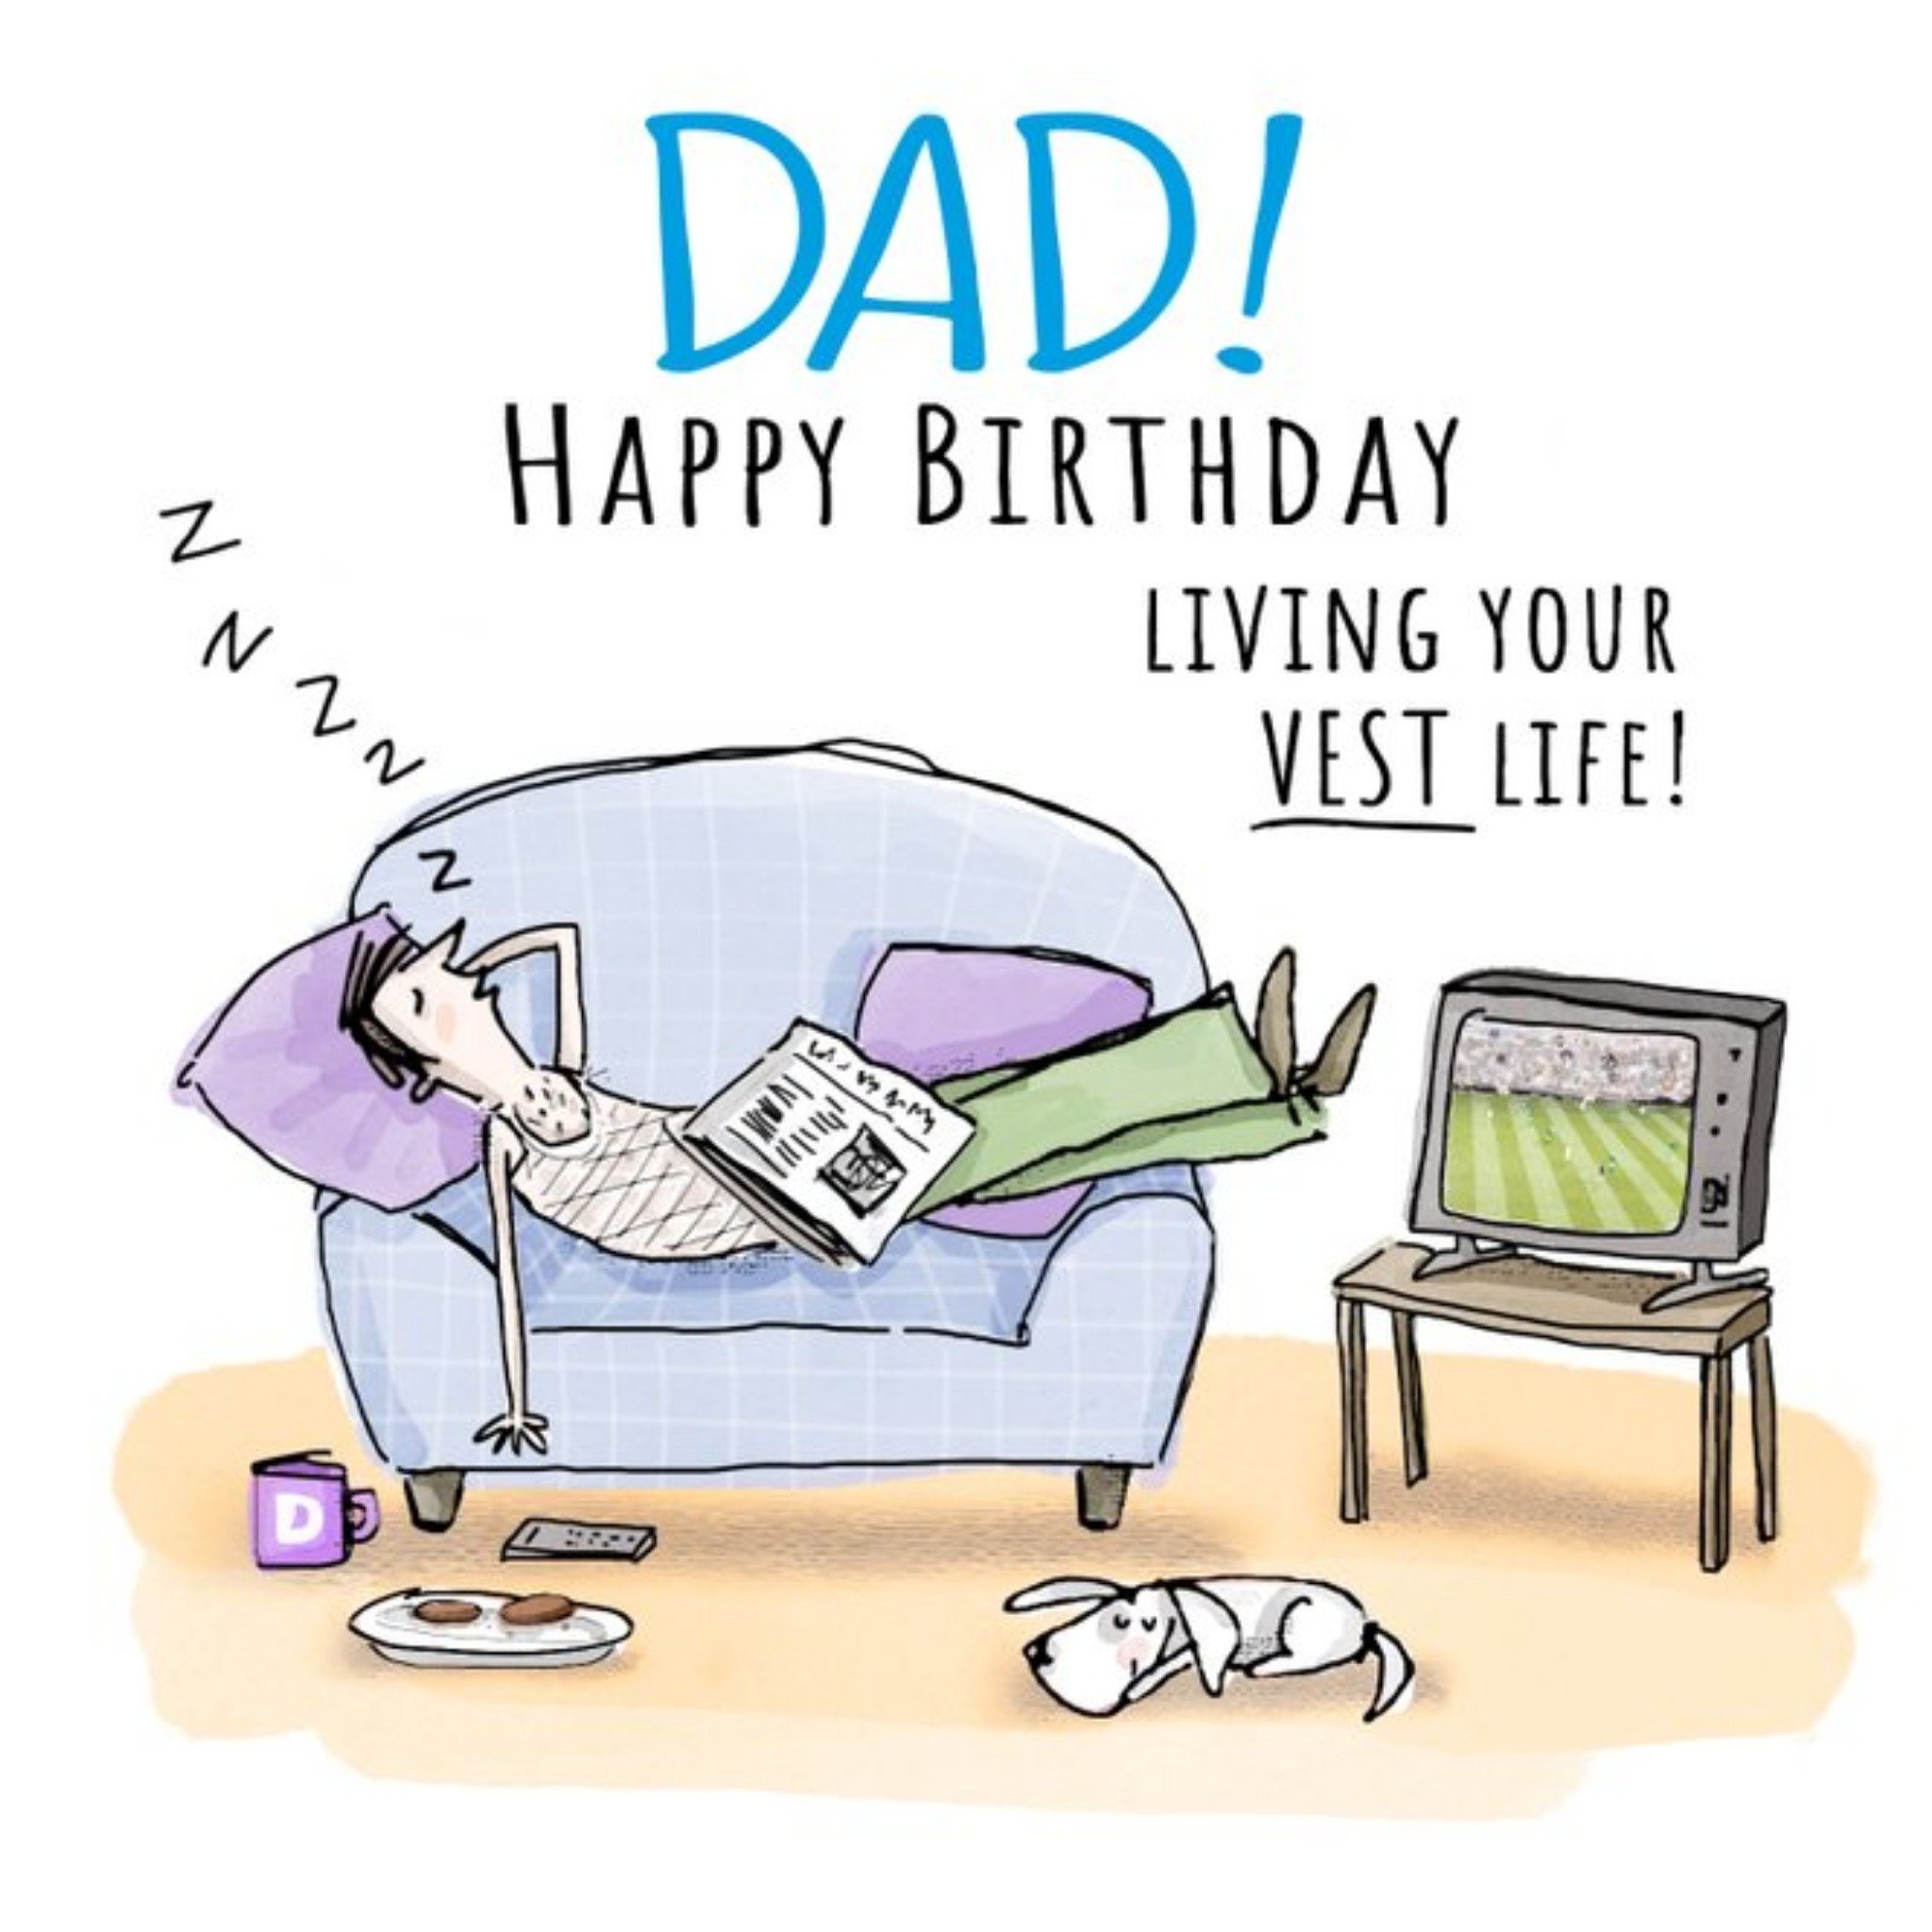 Moonpig Illustration Of A Man Relaxing On A Sofa Living Your Vest Life Dad's Birthday Card, Square